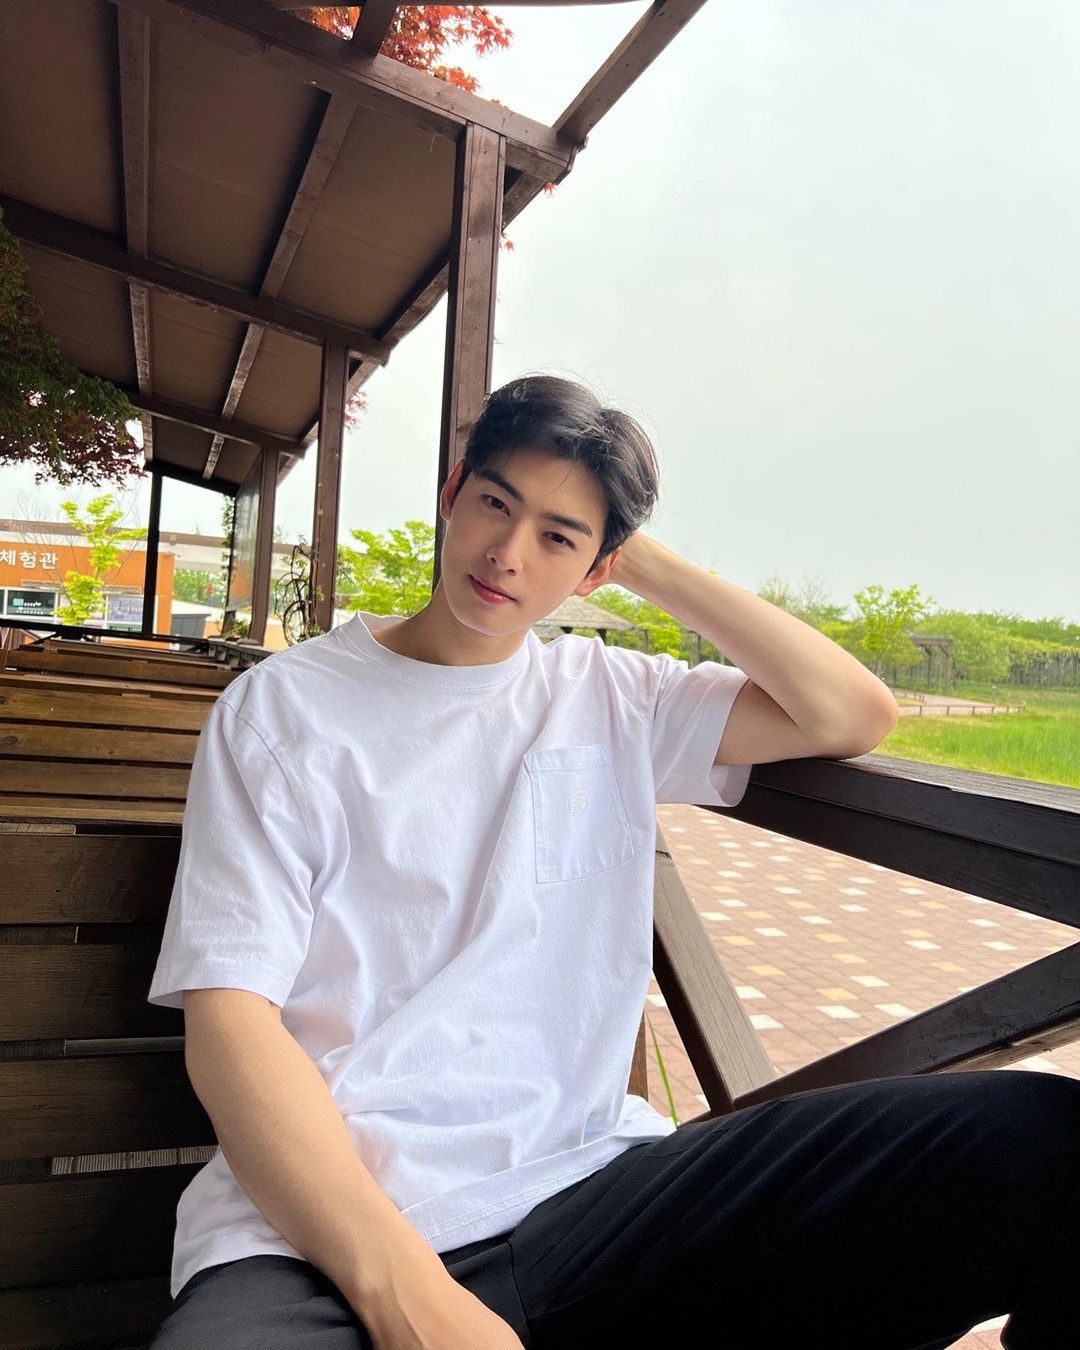 Cha Eun Woo sitting on a bench in white t-shirt and black pants